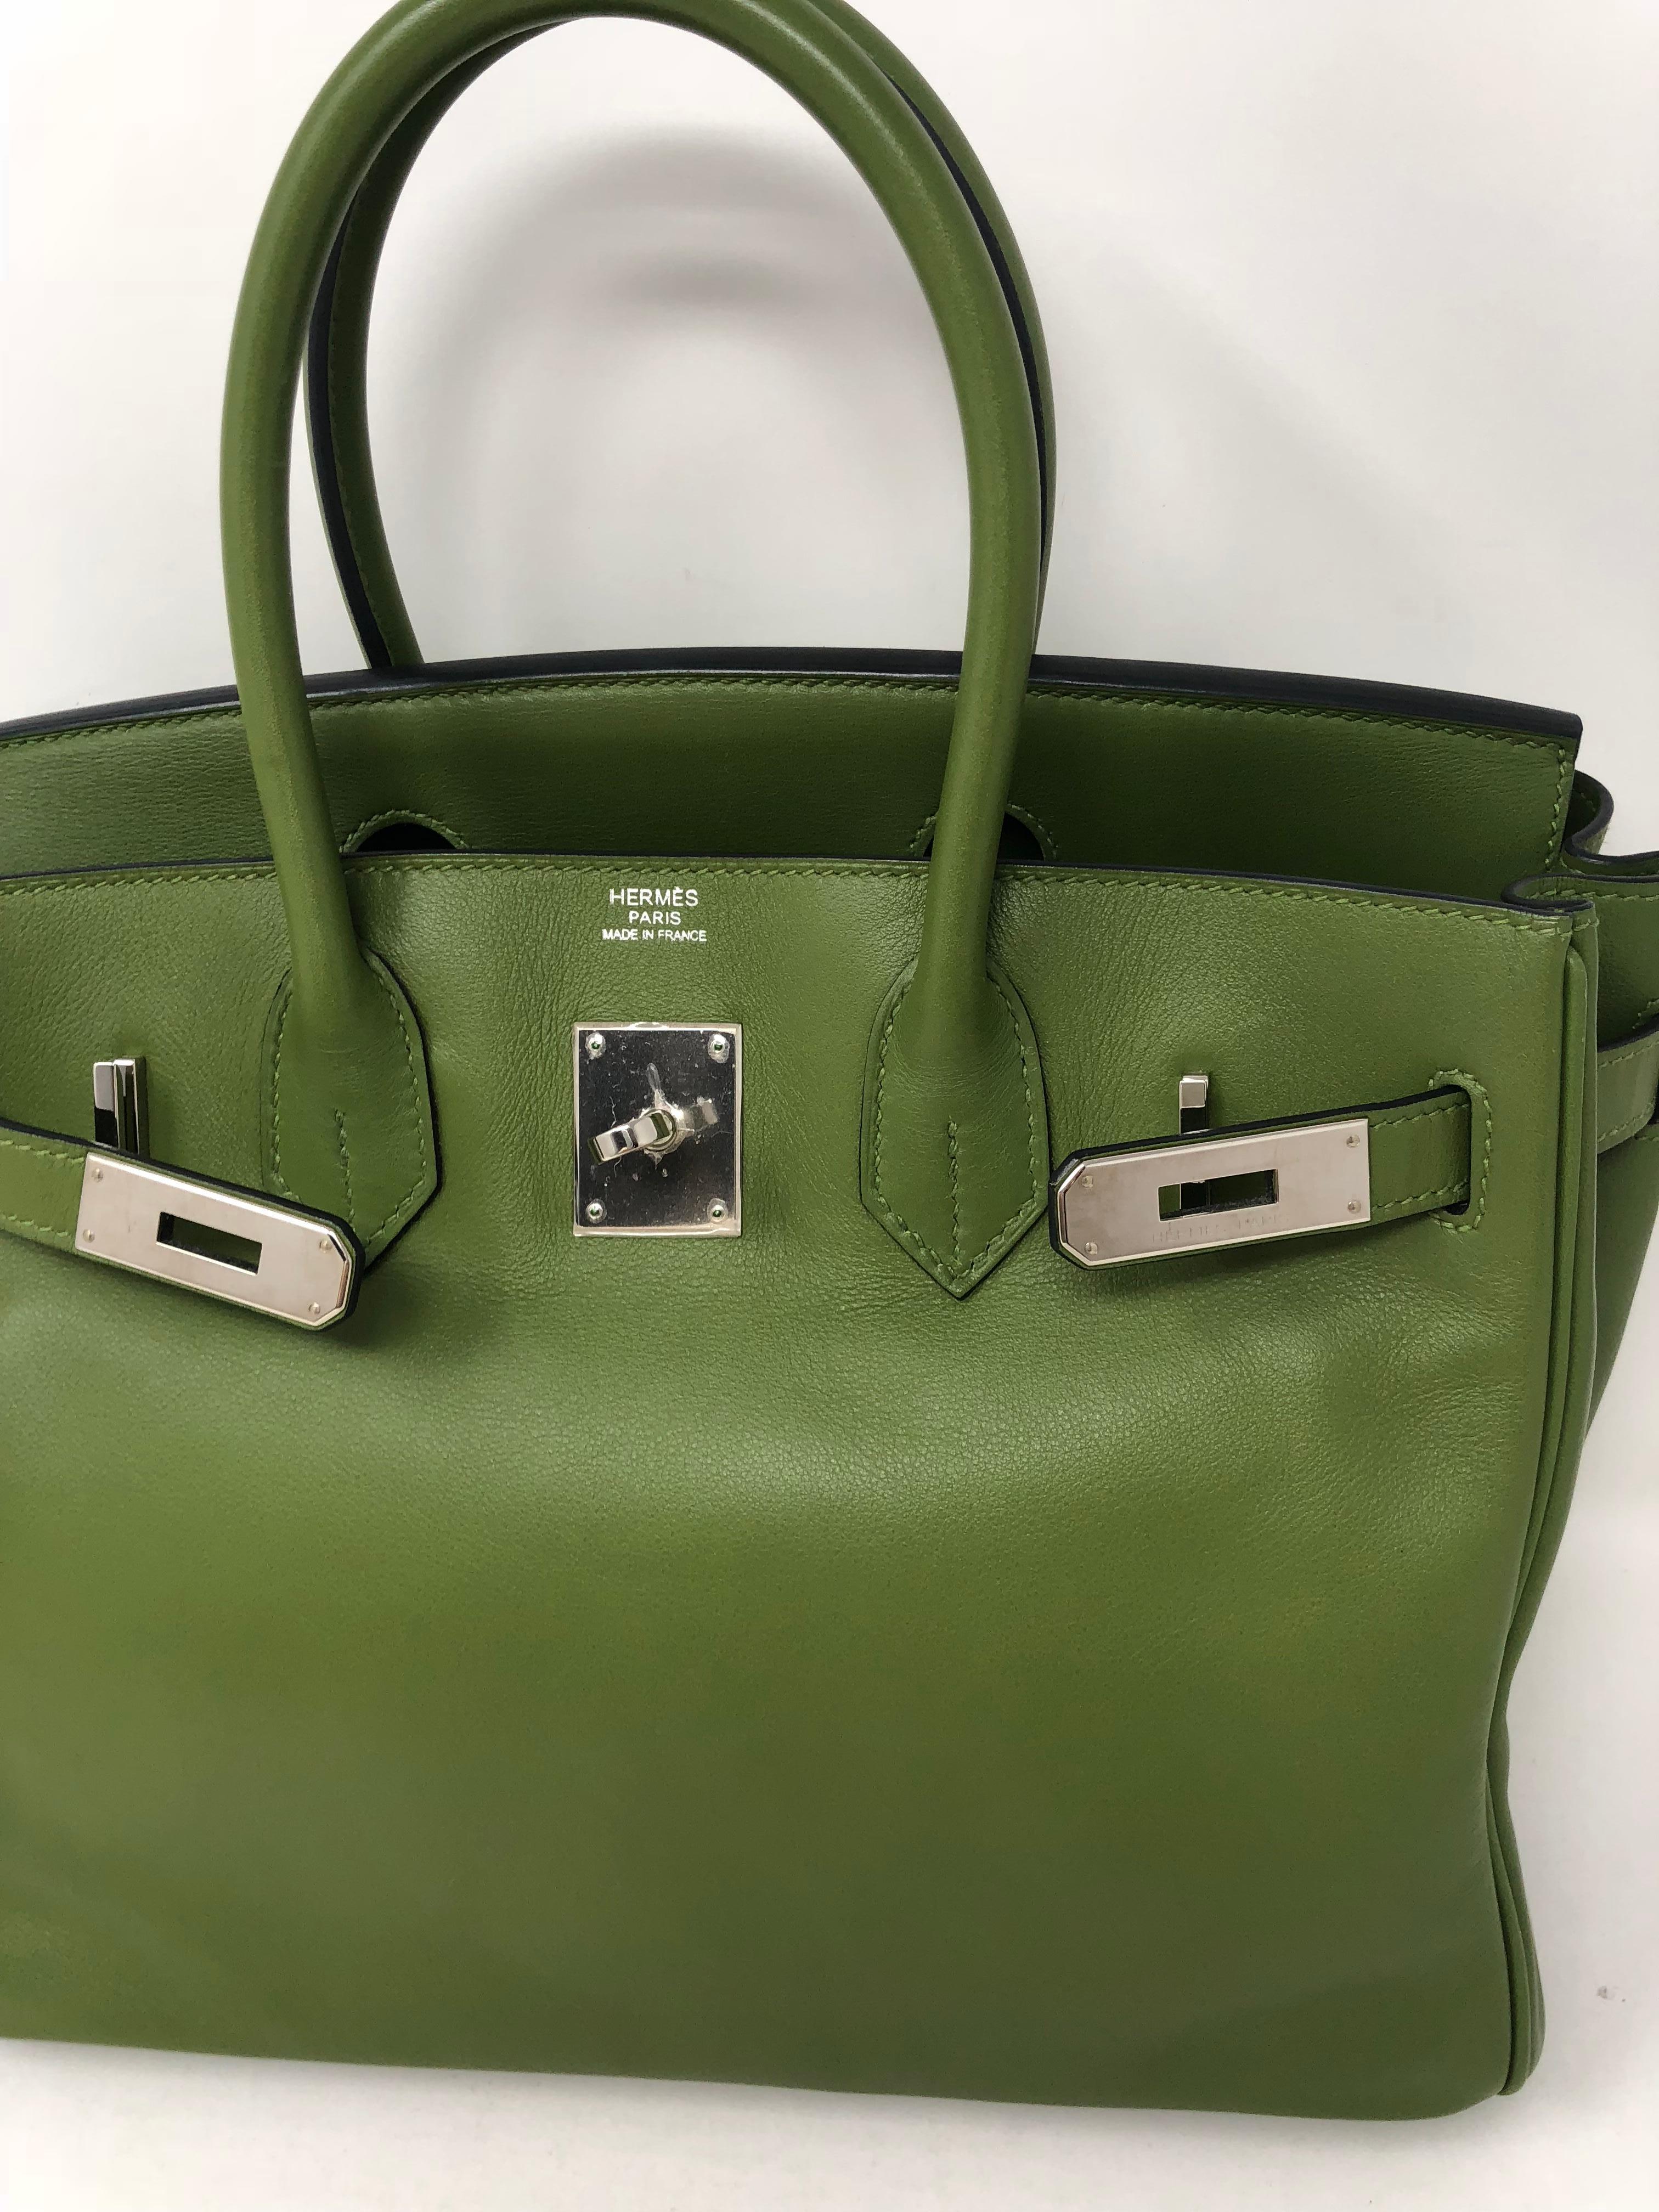 Hermes Birkin 30 in Pelouse Swift leather. Pelouse in French means lawn. The green-pelouse color is beautiful and no longer available at Hermes. From 2009 and in very good condiotion. Most wanted size 30. Swift leather is beautiful. Palladium